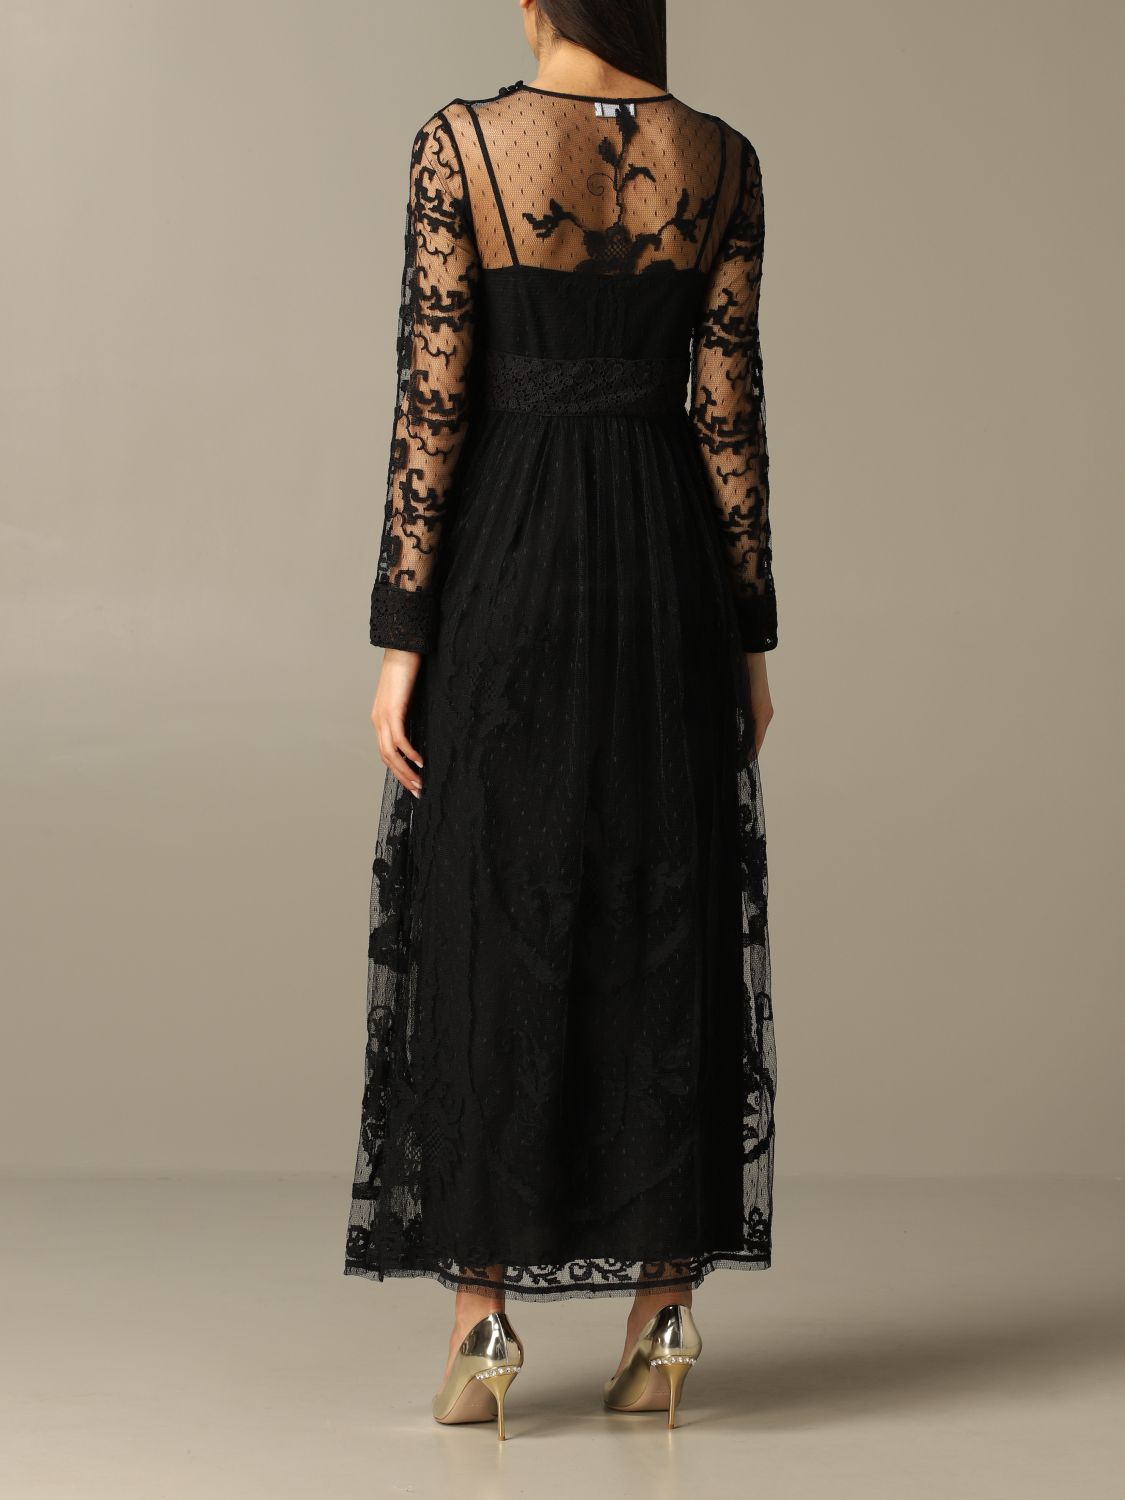 Red Valentino Long Dress In Point D Esprit Tulle And Lace Black Dress Red Valentino